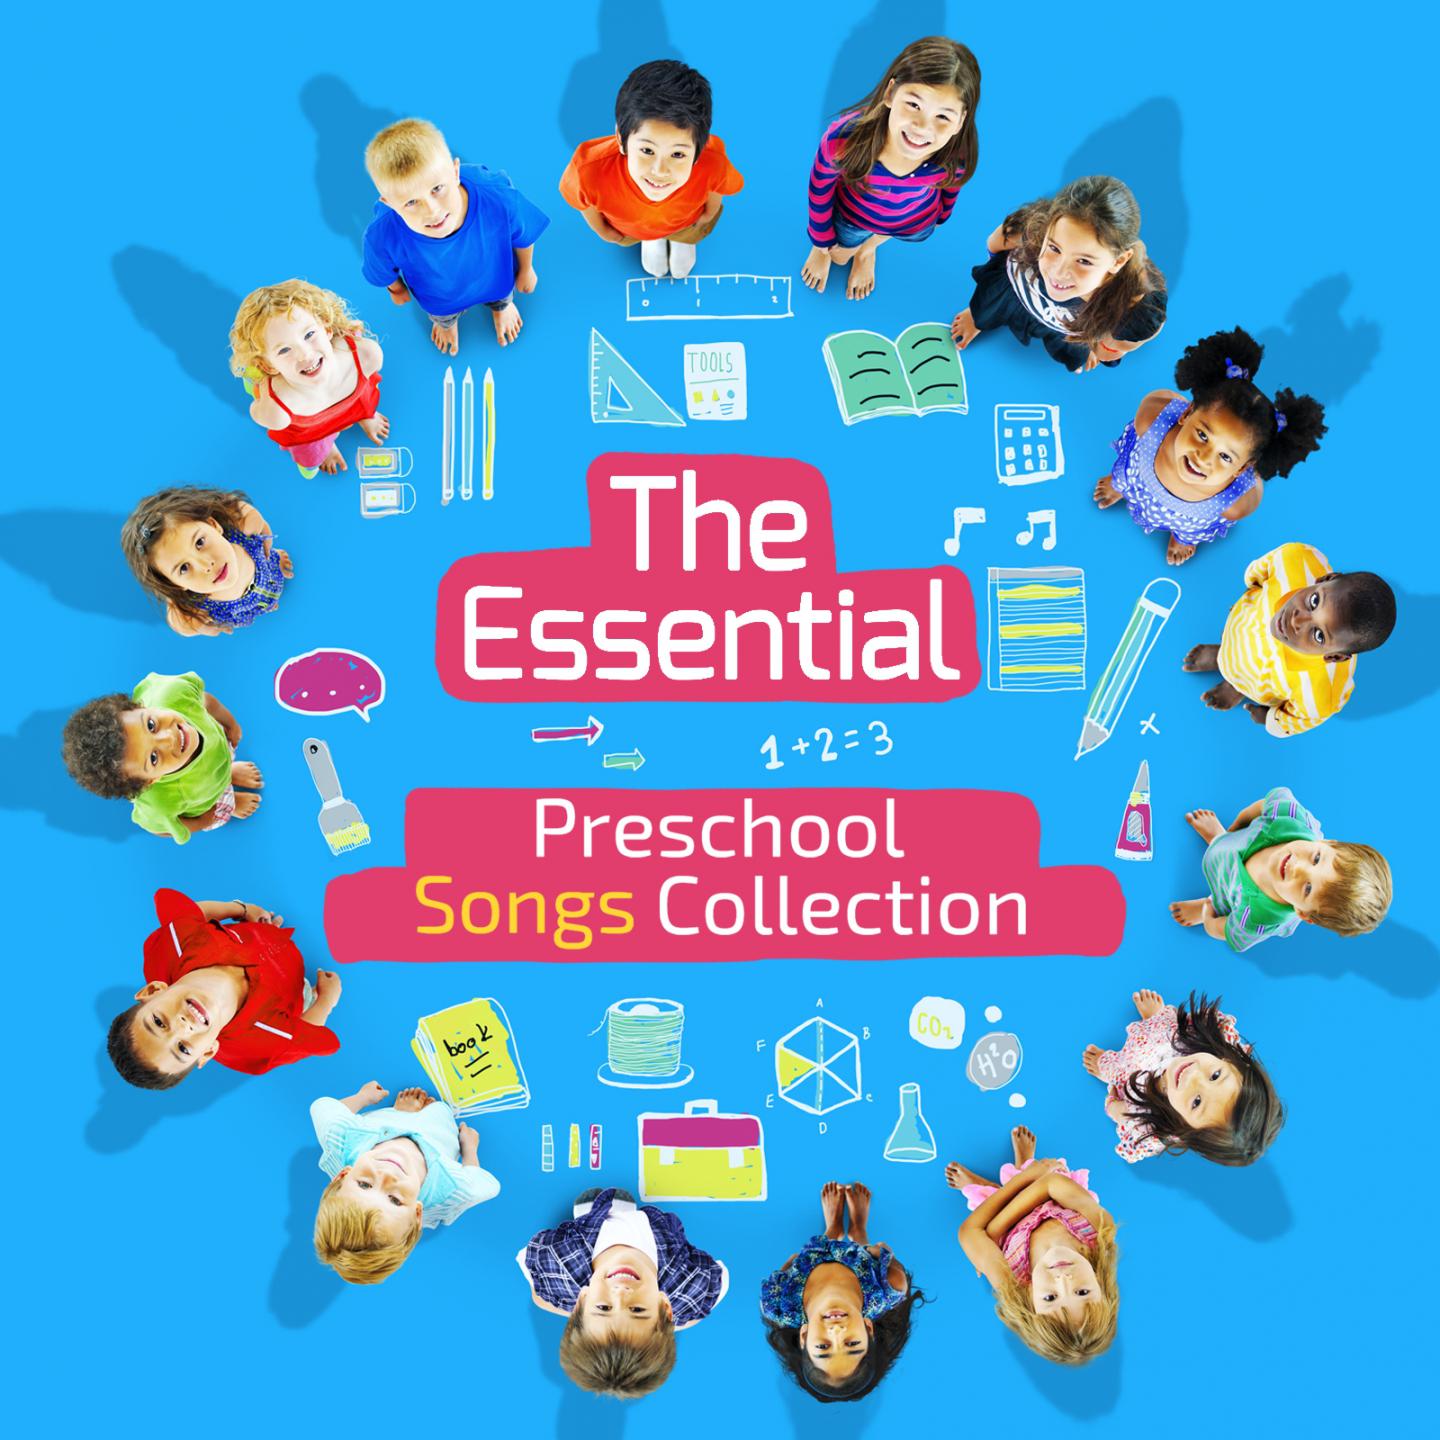 The Essential Preschool Songs Collection